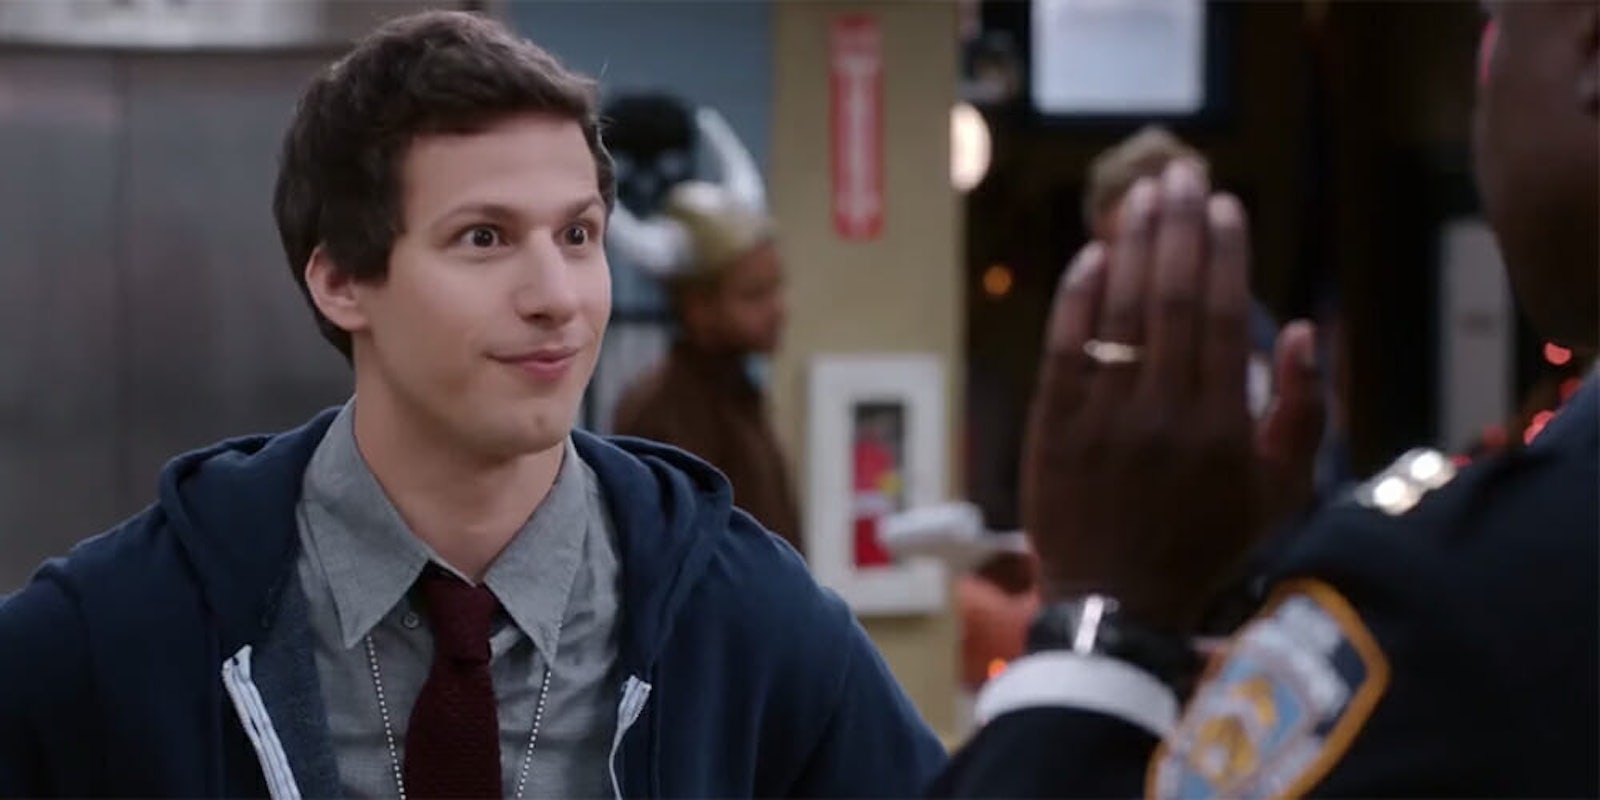 'Brooklyn Nine-Nine' is being cancelled after five seasons, Fox announced.